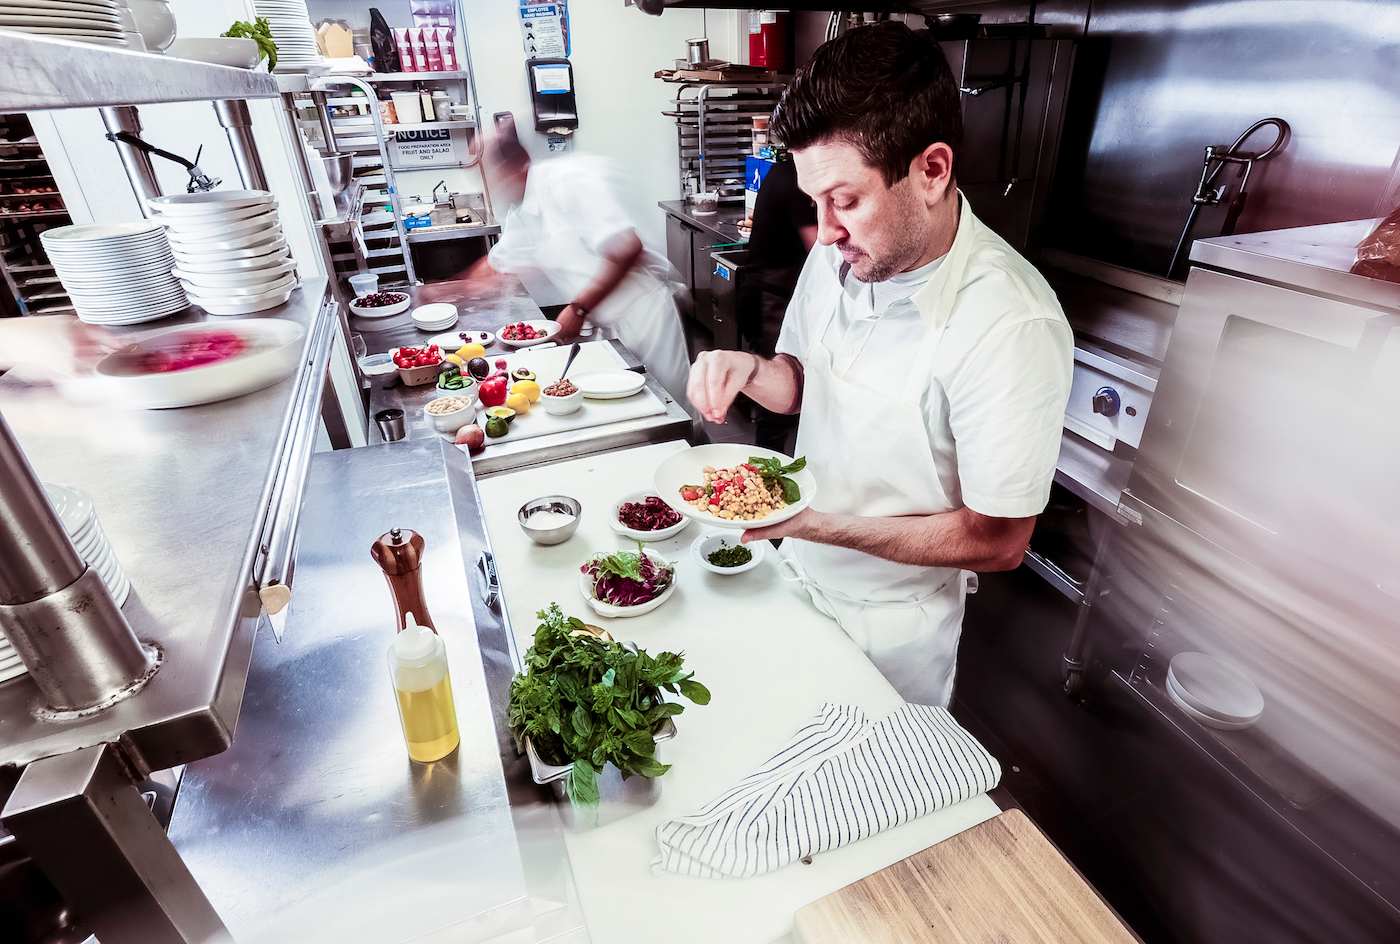 Chef preparing a meal at a restaurant